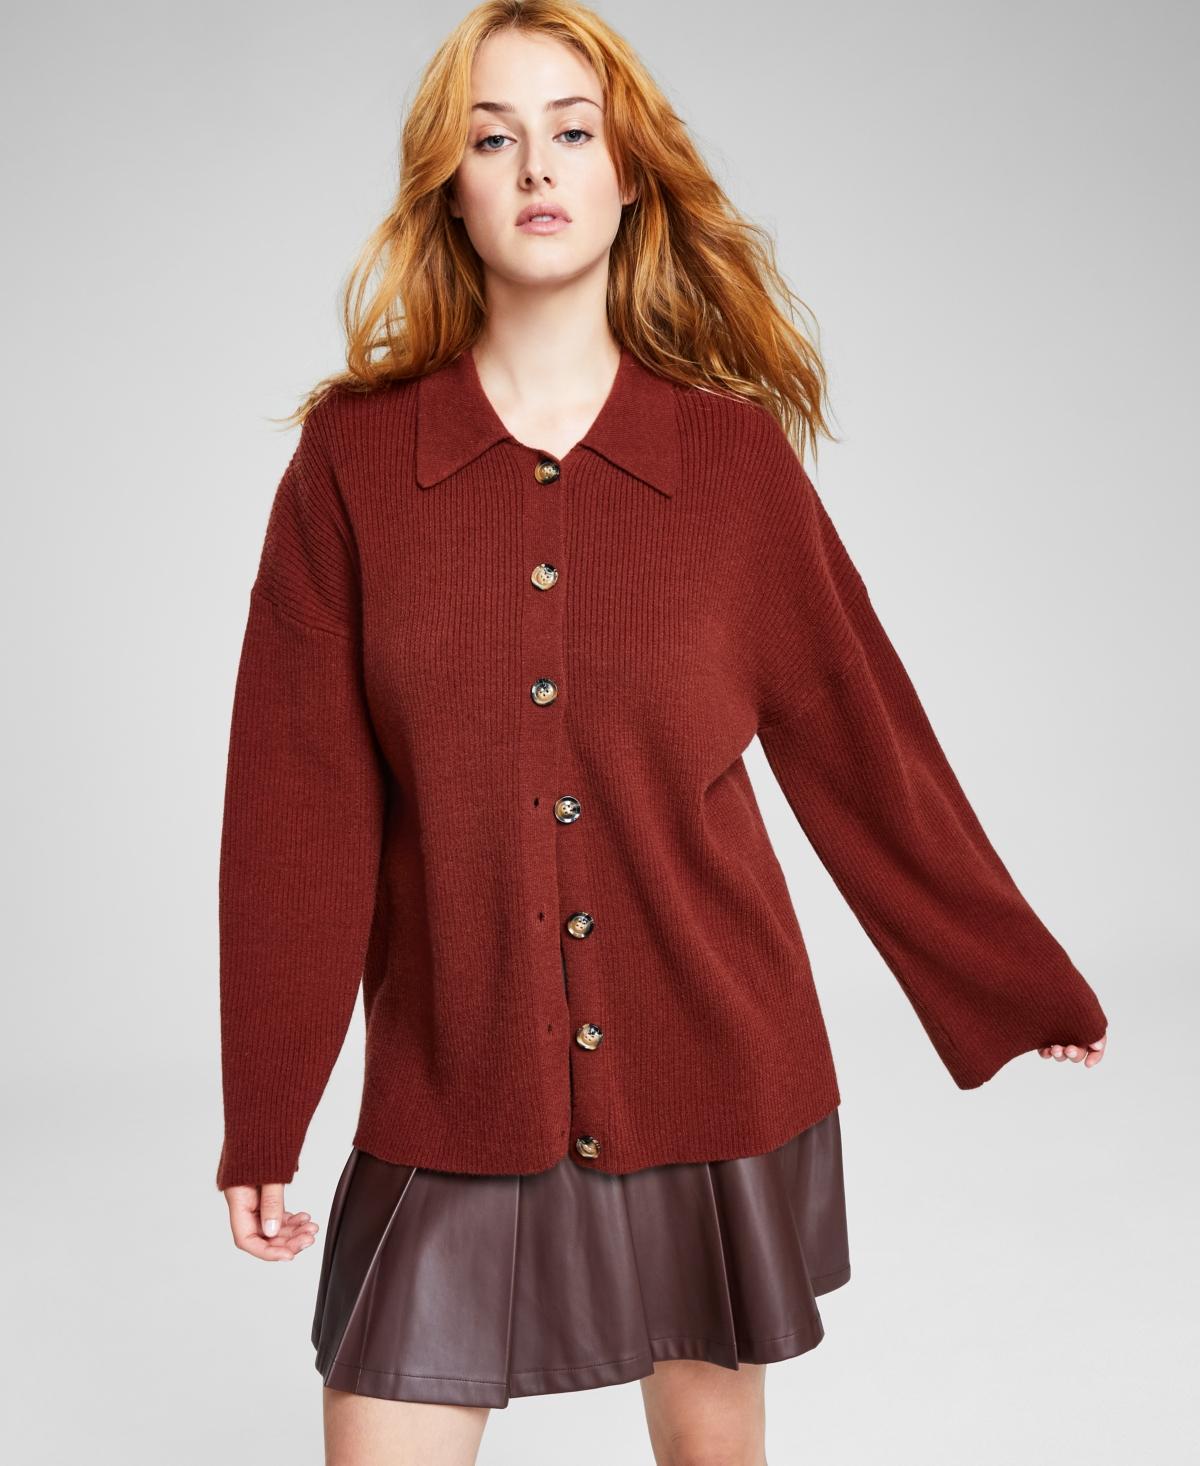 And Now This Womens Collared Cardigan Sweater Product Image